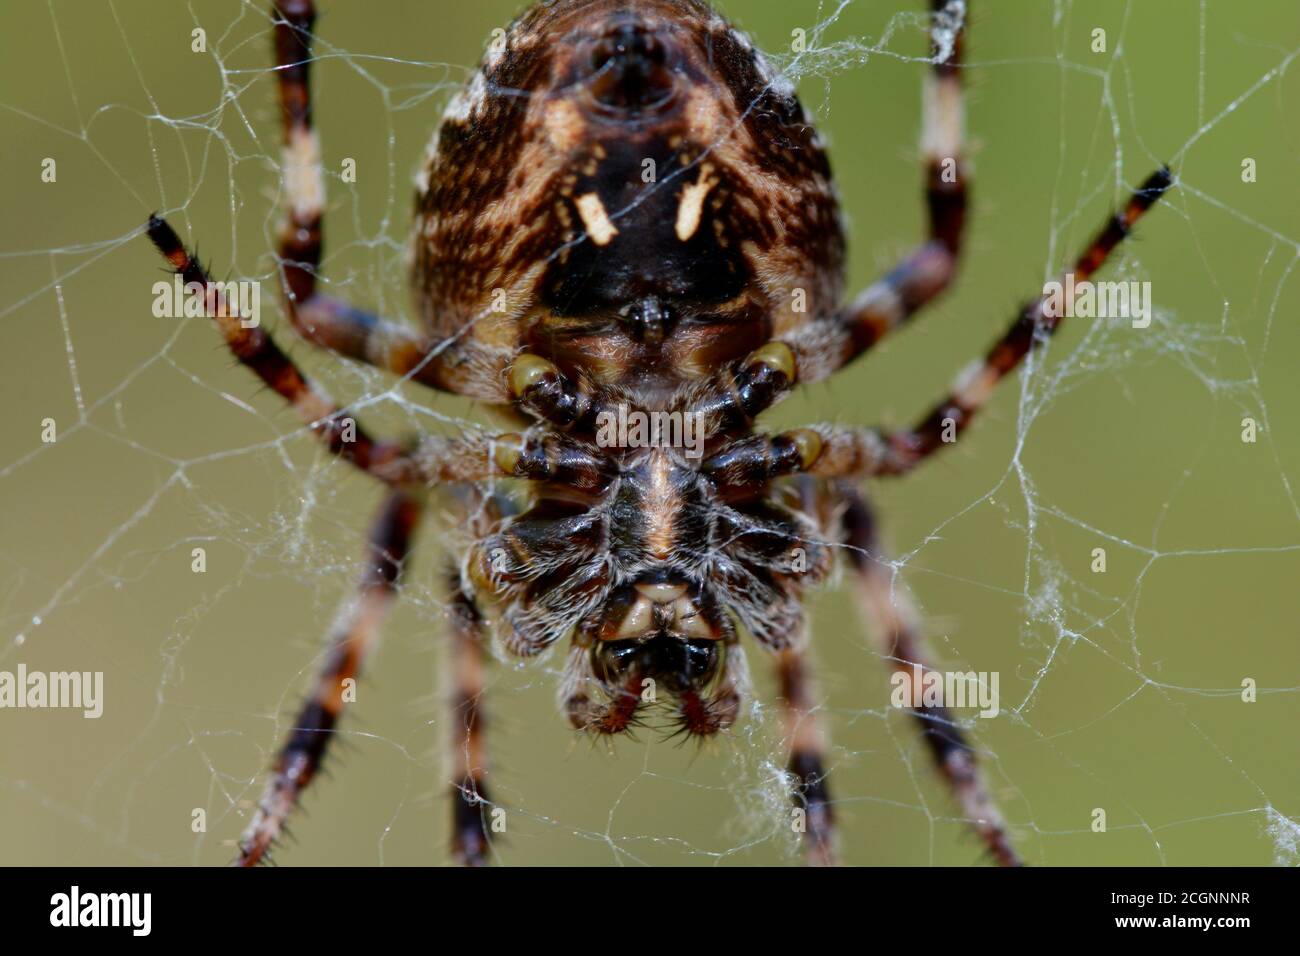 close up of a large garden spider Stock Photo